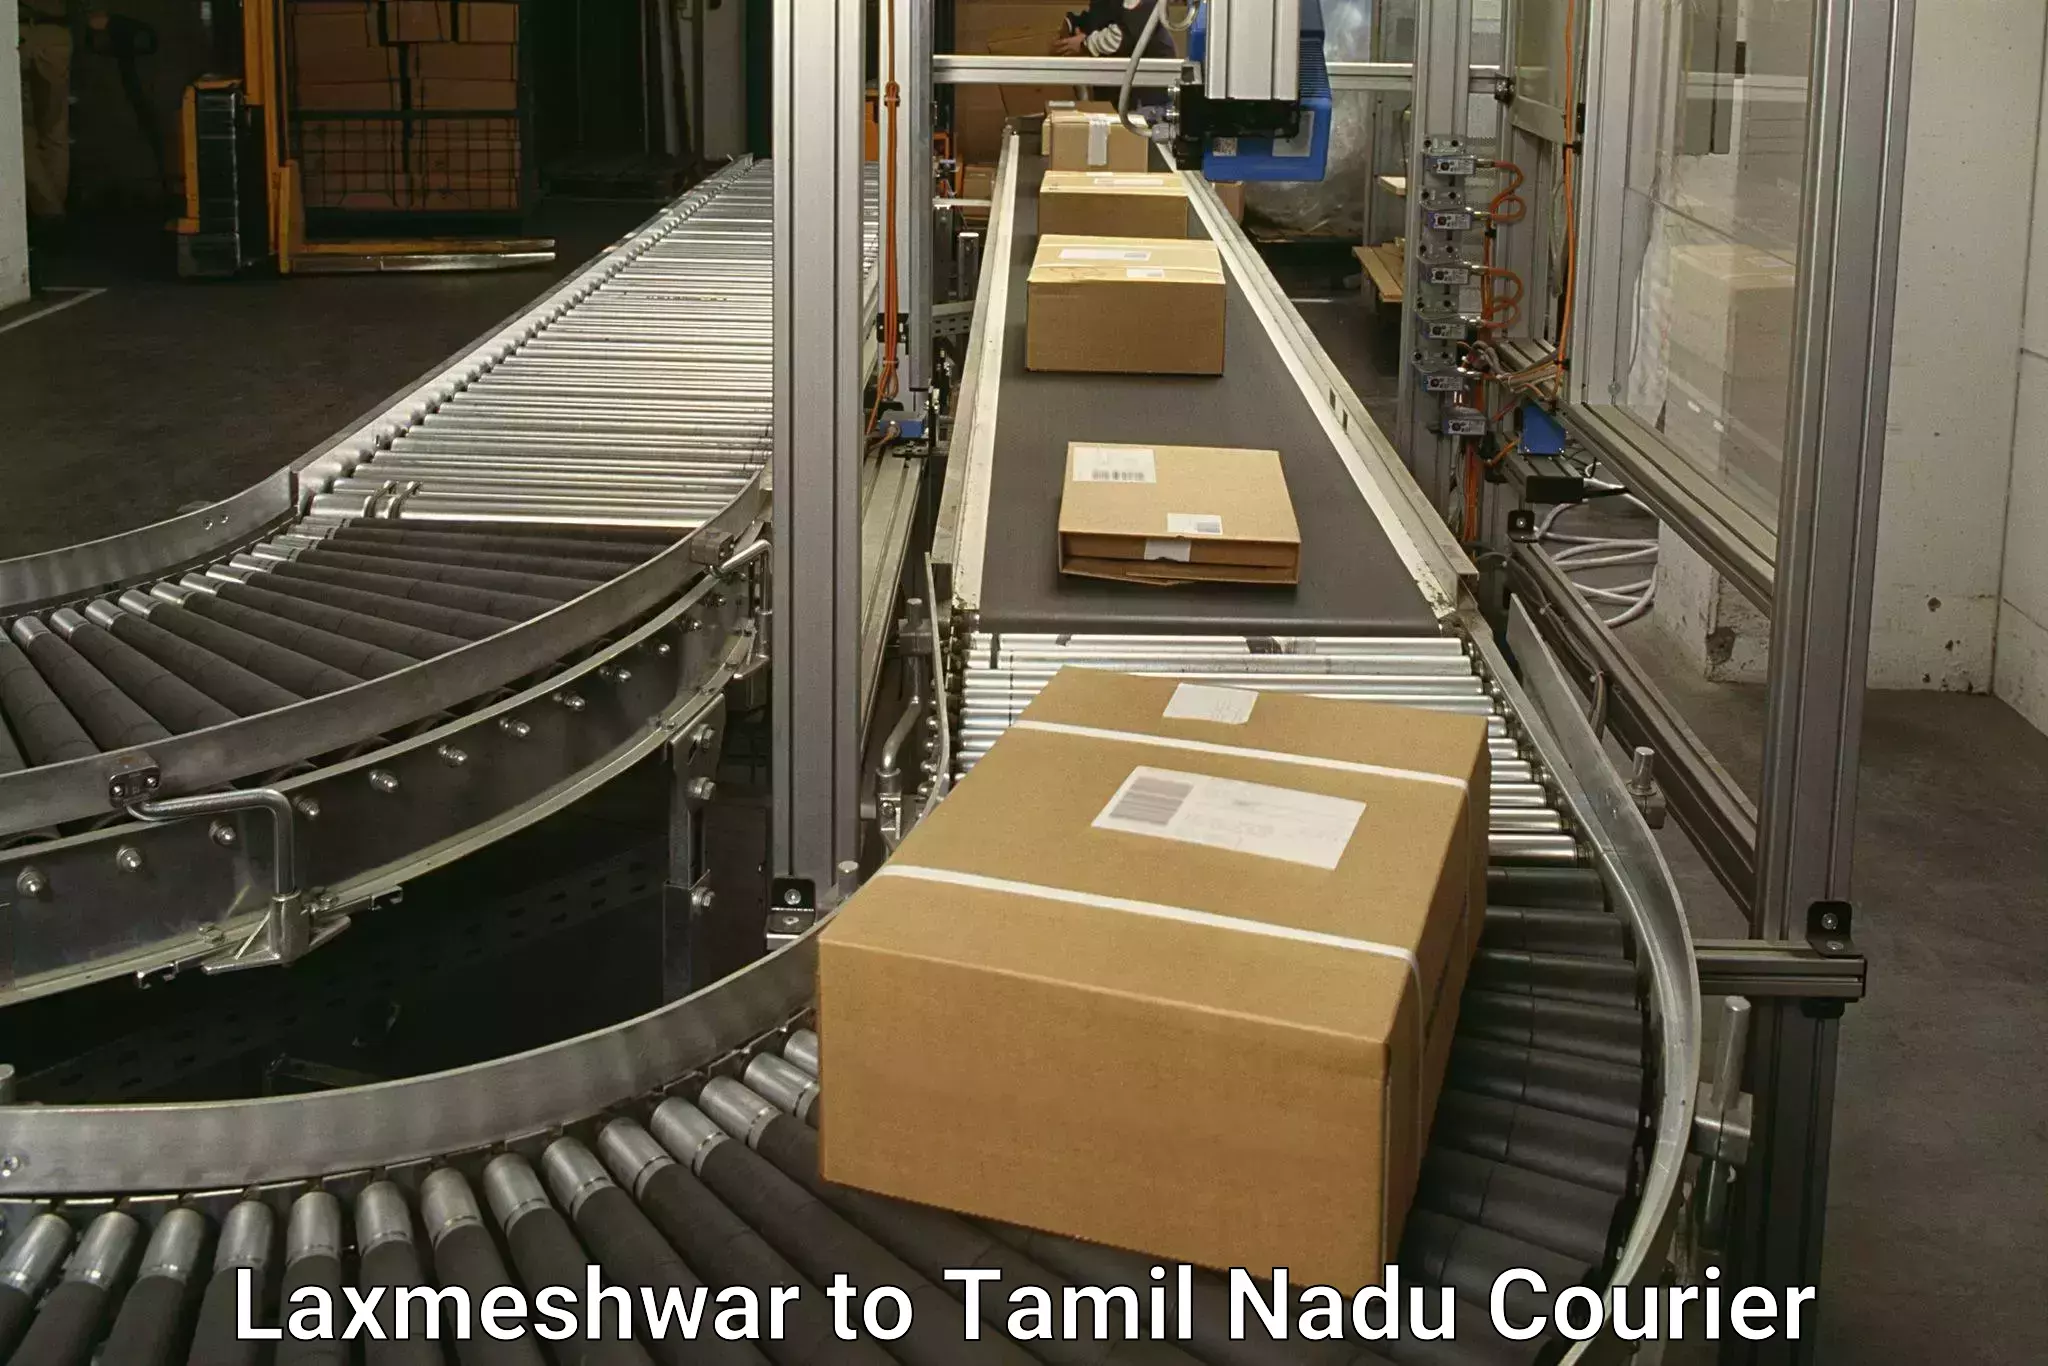 Modern courier technology in Laxmeshwar to Meenakshi Academy of Higher Education and Research Chennai